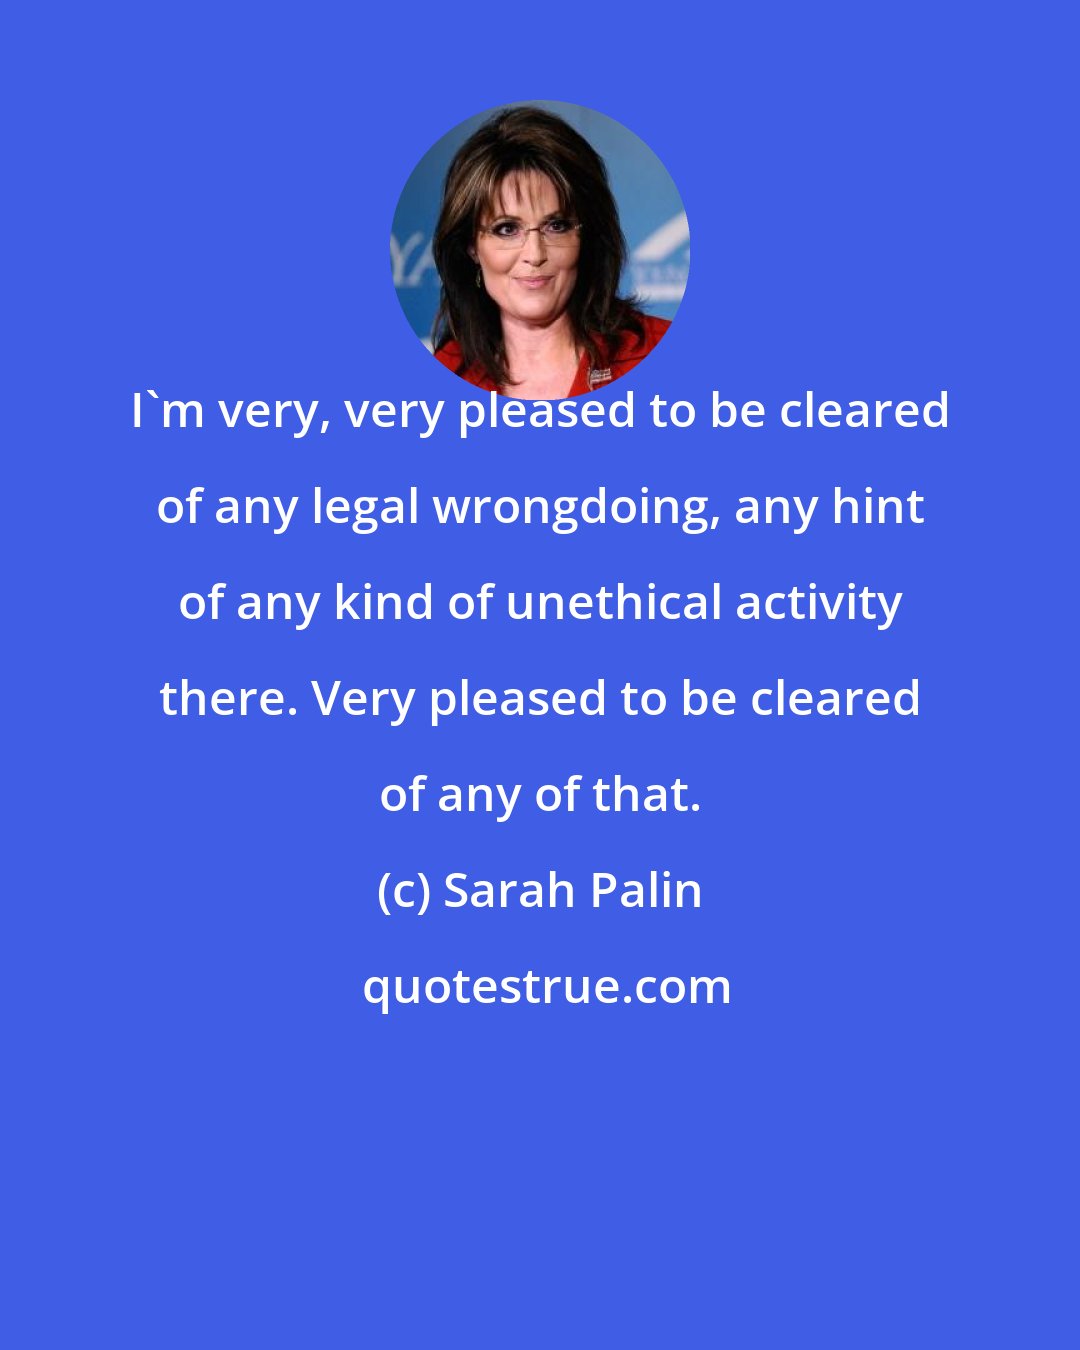 Sarah Palin: I'm very, very pleased to be cleared of any legal wrongdoing, any hint of any kind of unethical activity there. Very pleased to be cleared of any of that.